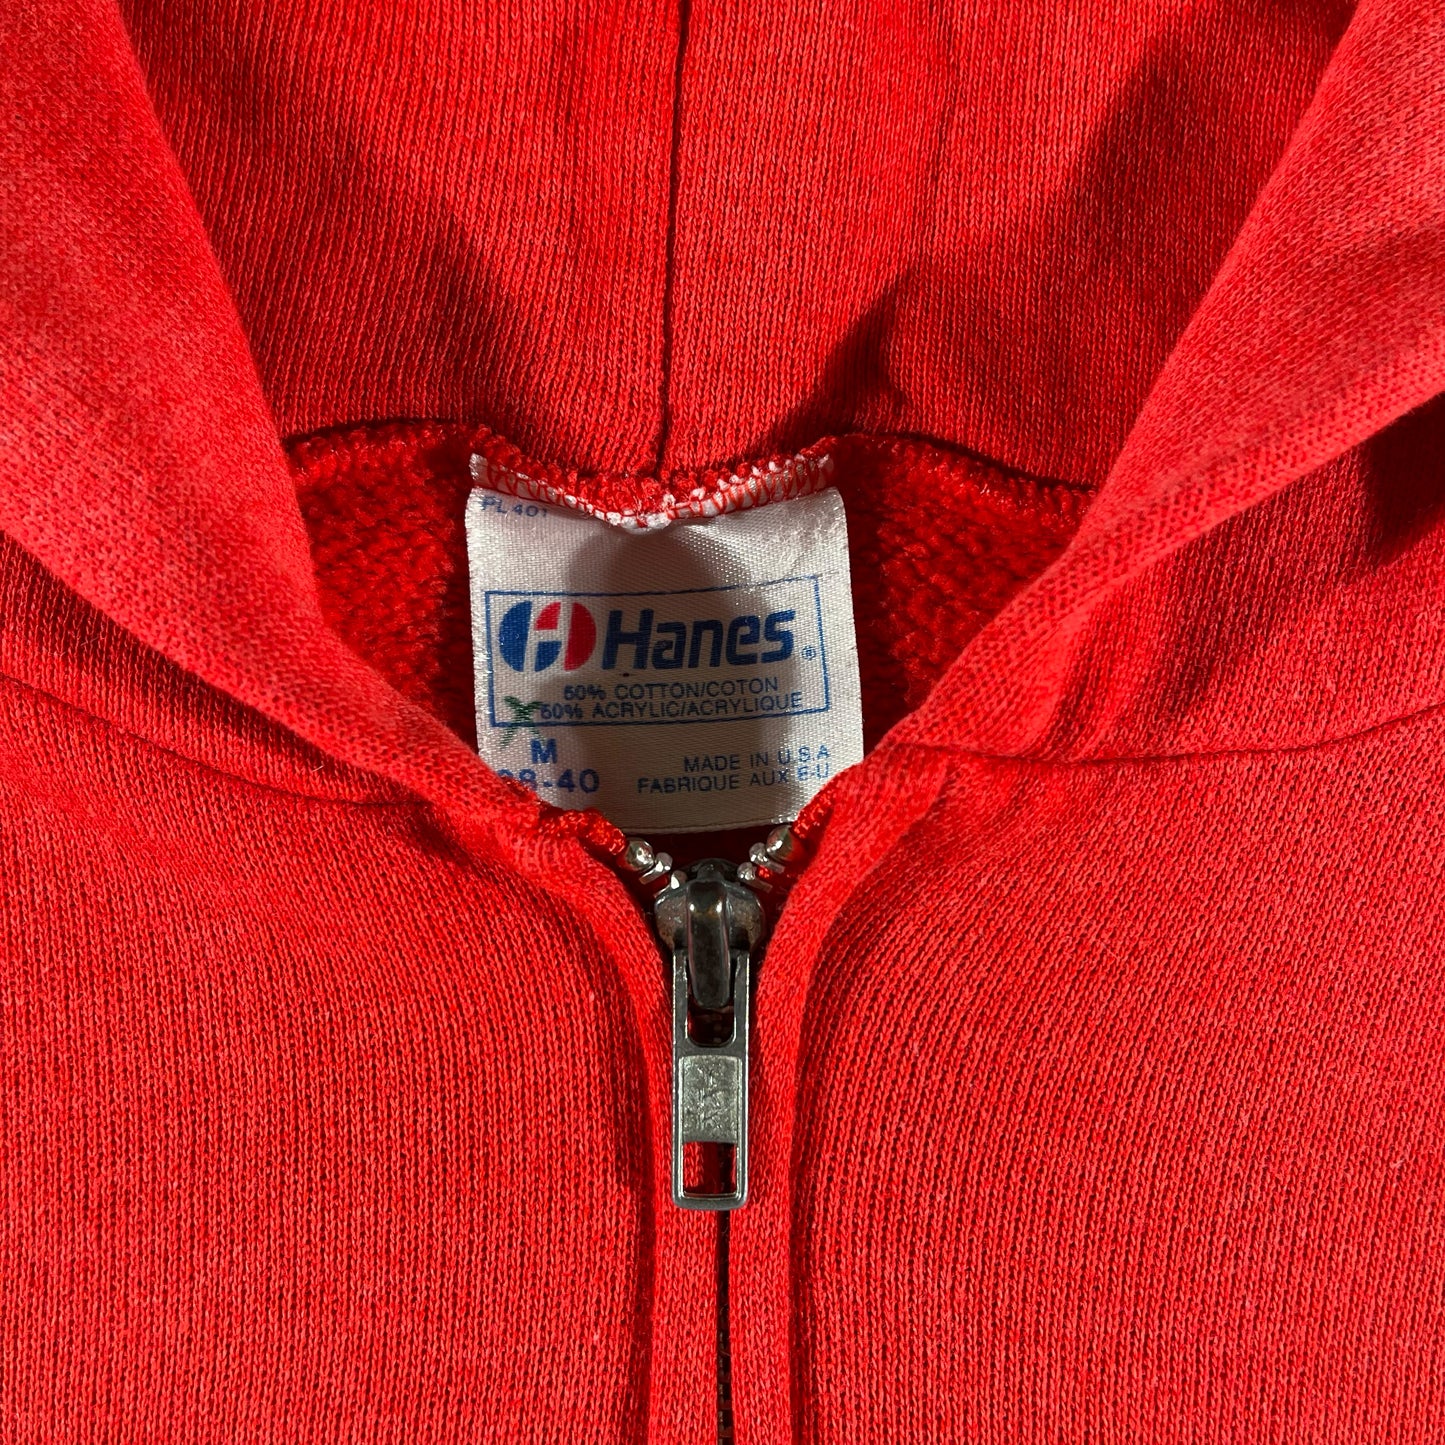 80s Faded Red Zip Up Hoodie- M